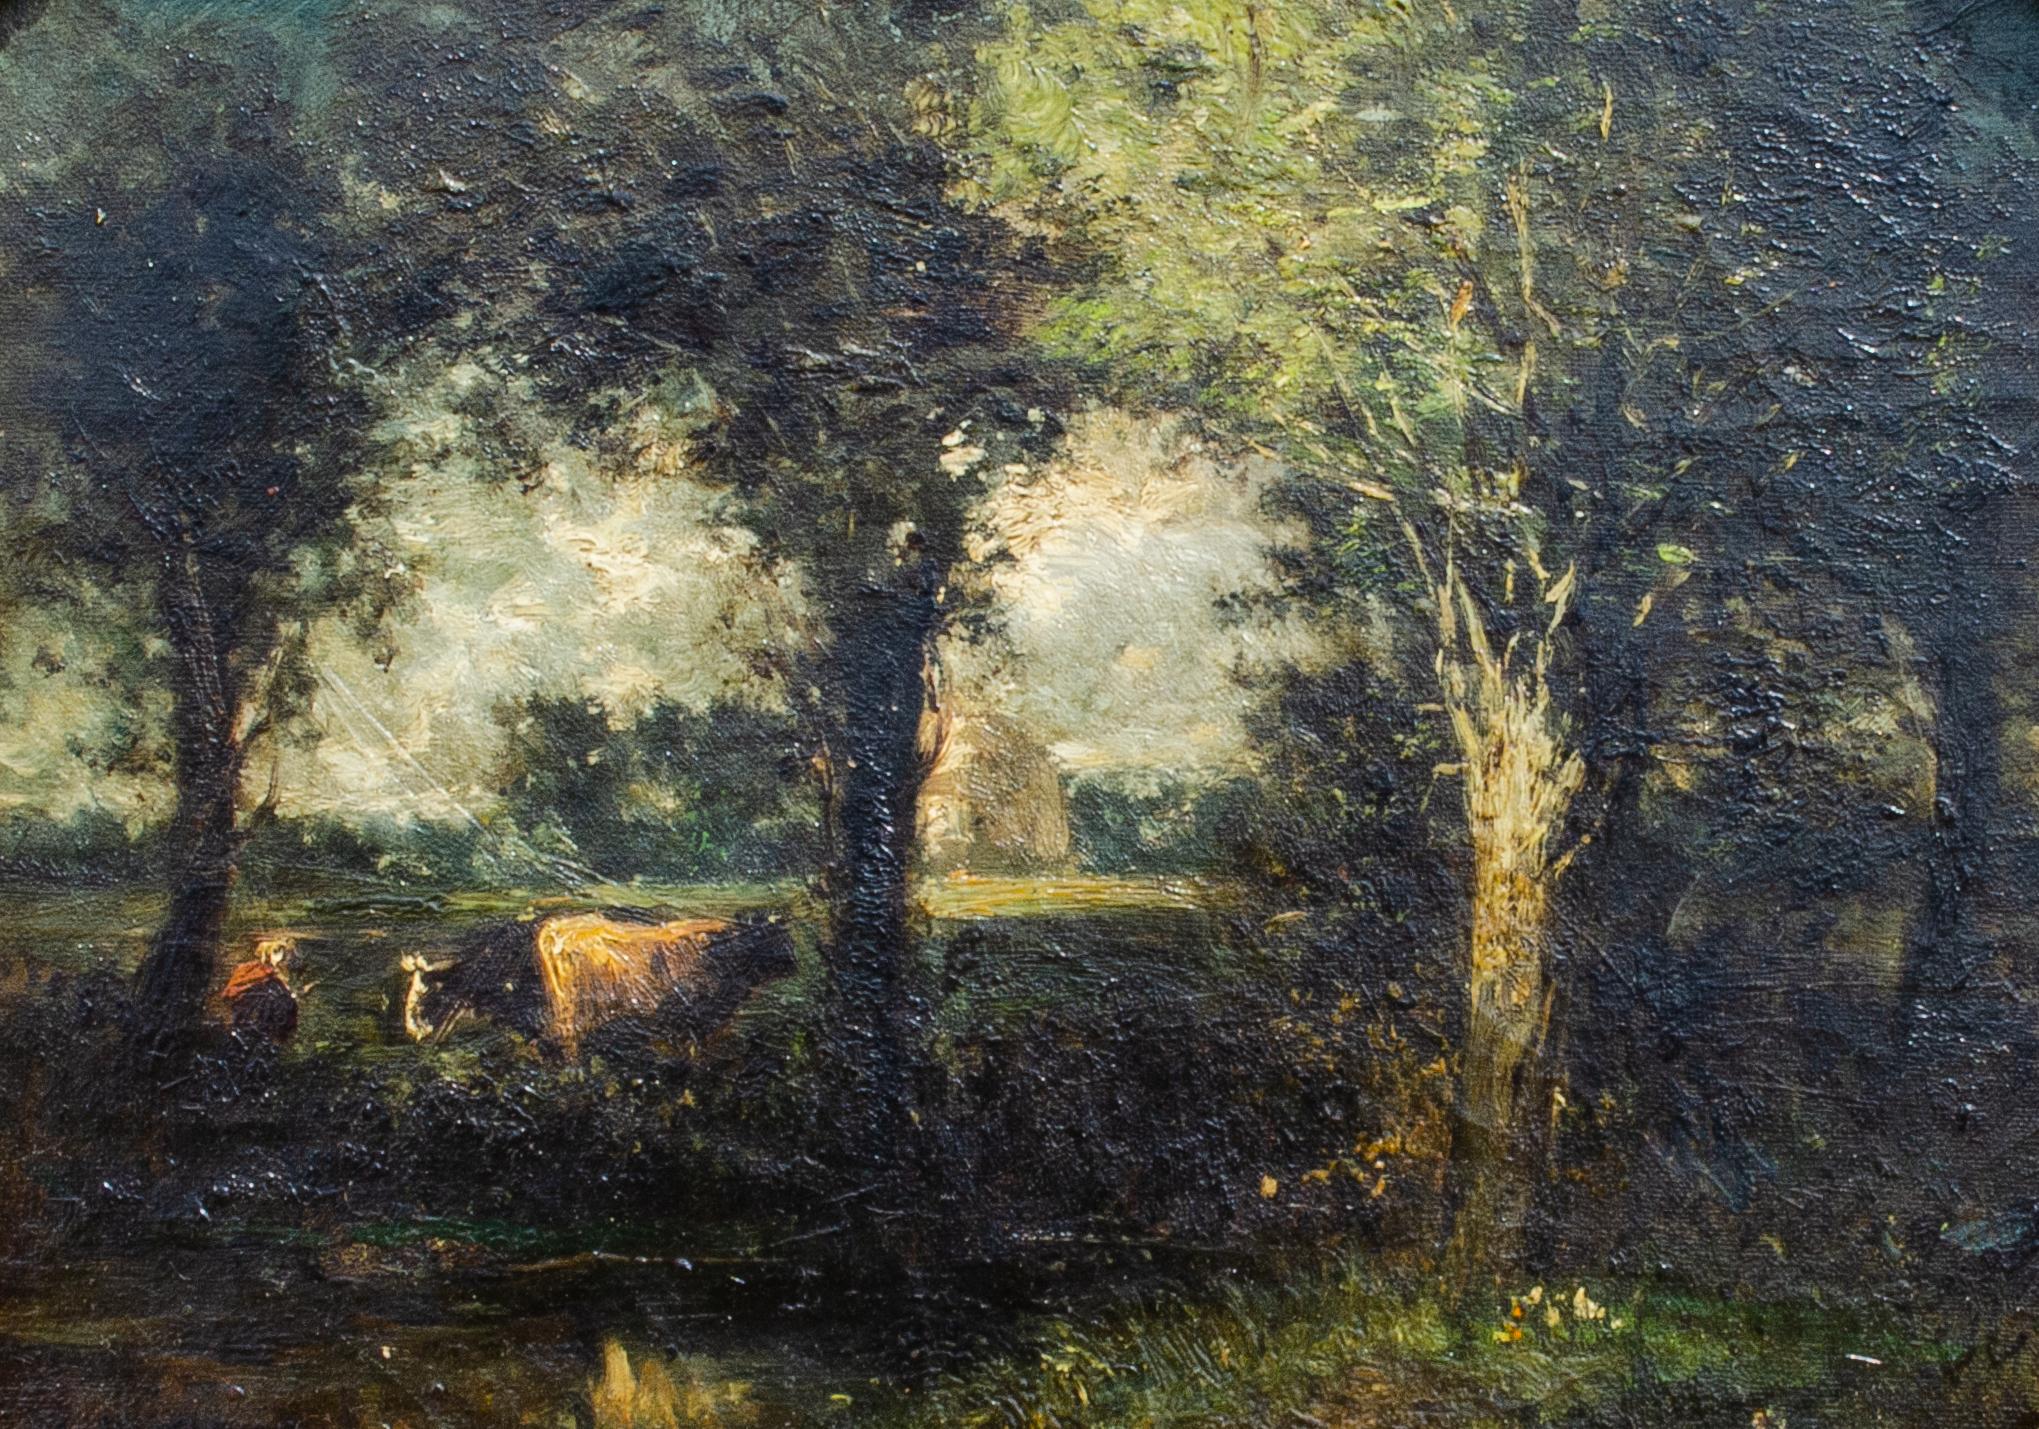 Charles Henry Miller (American, 1842-1922)
Untitled (After Troyon), c, 1885
Oil on canvas
9 x 12 in.
Framed: 14 x 17 x 3 1/2 in.
Signed lower left, inscribed verso

Charles Henry Miller was a noted artist and painter of landscapes from Long Island,